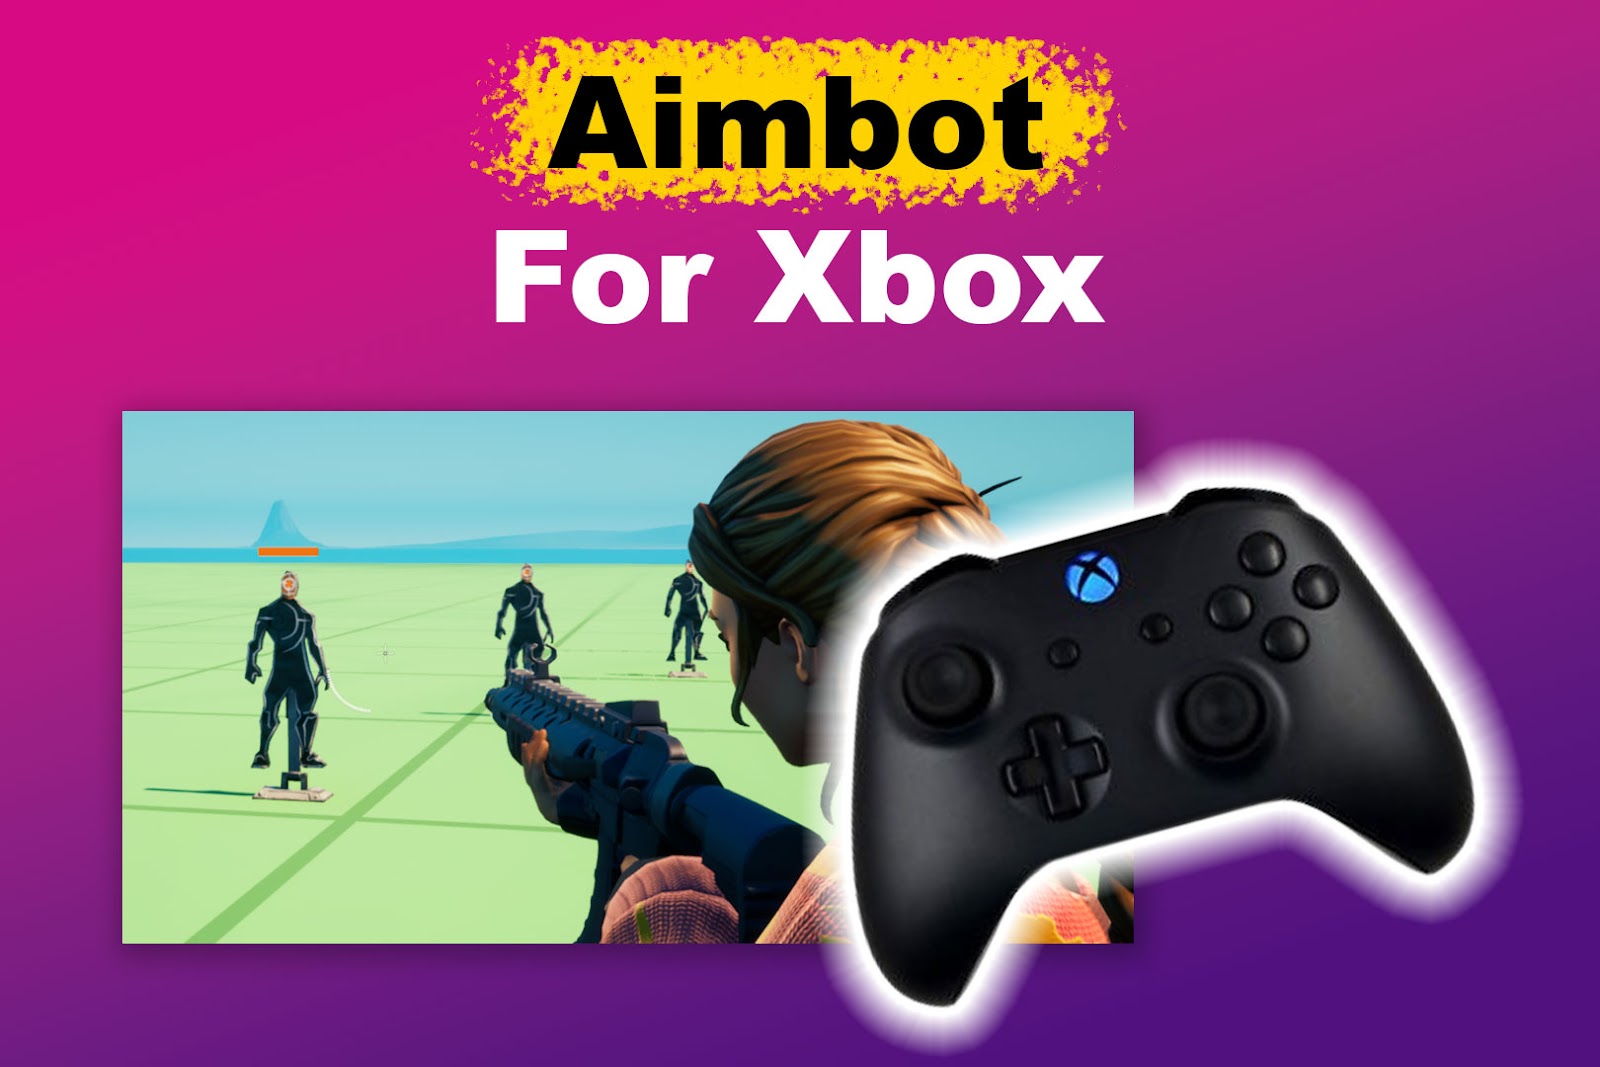 Using Aimbot for Xbox [Is it Legal? How to Install One] - Alvaro Trigo's  Blog